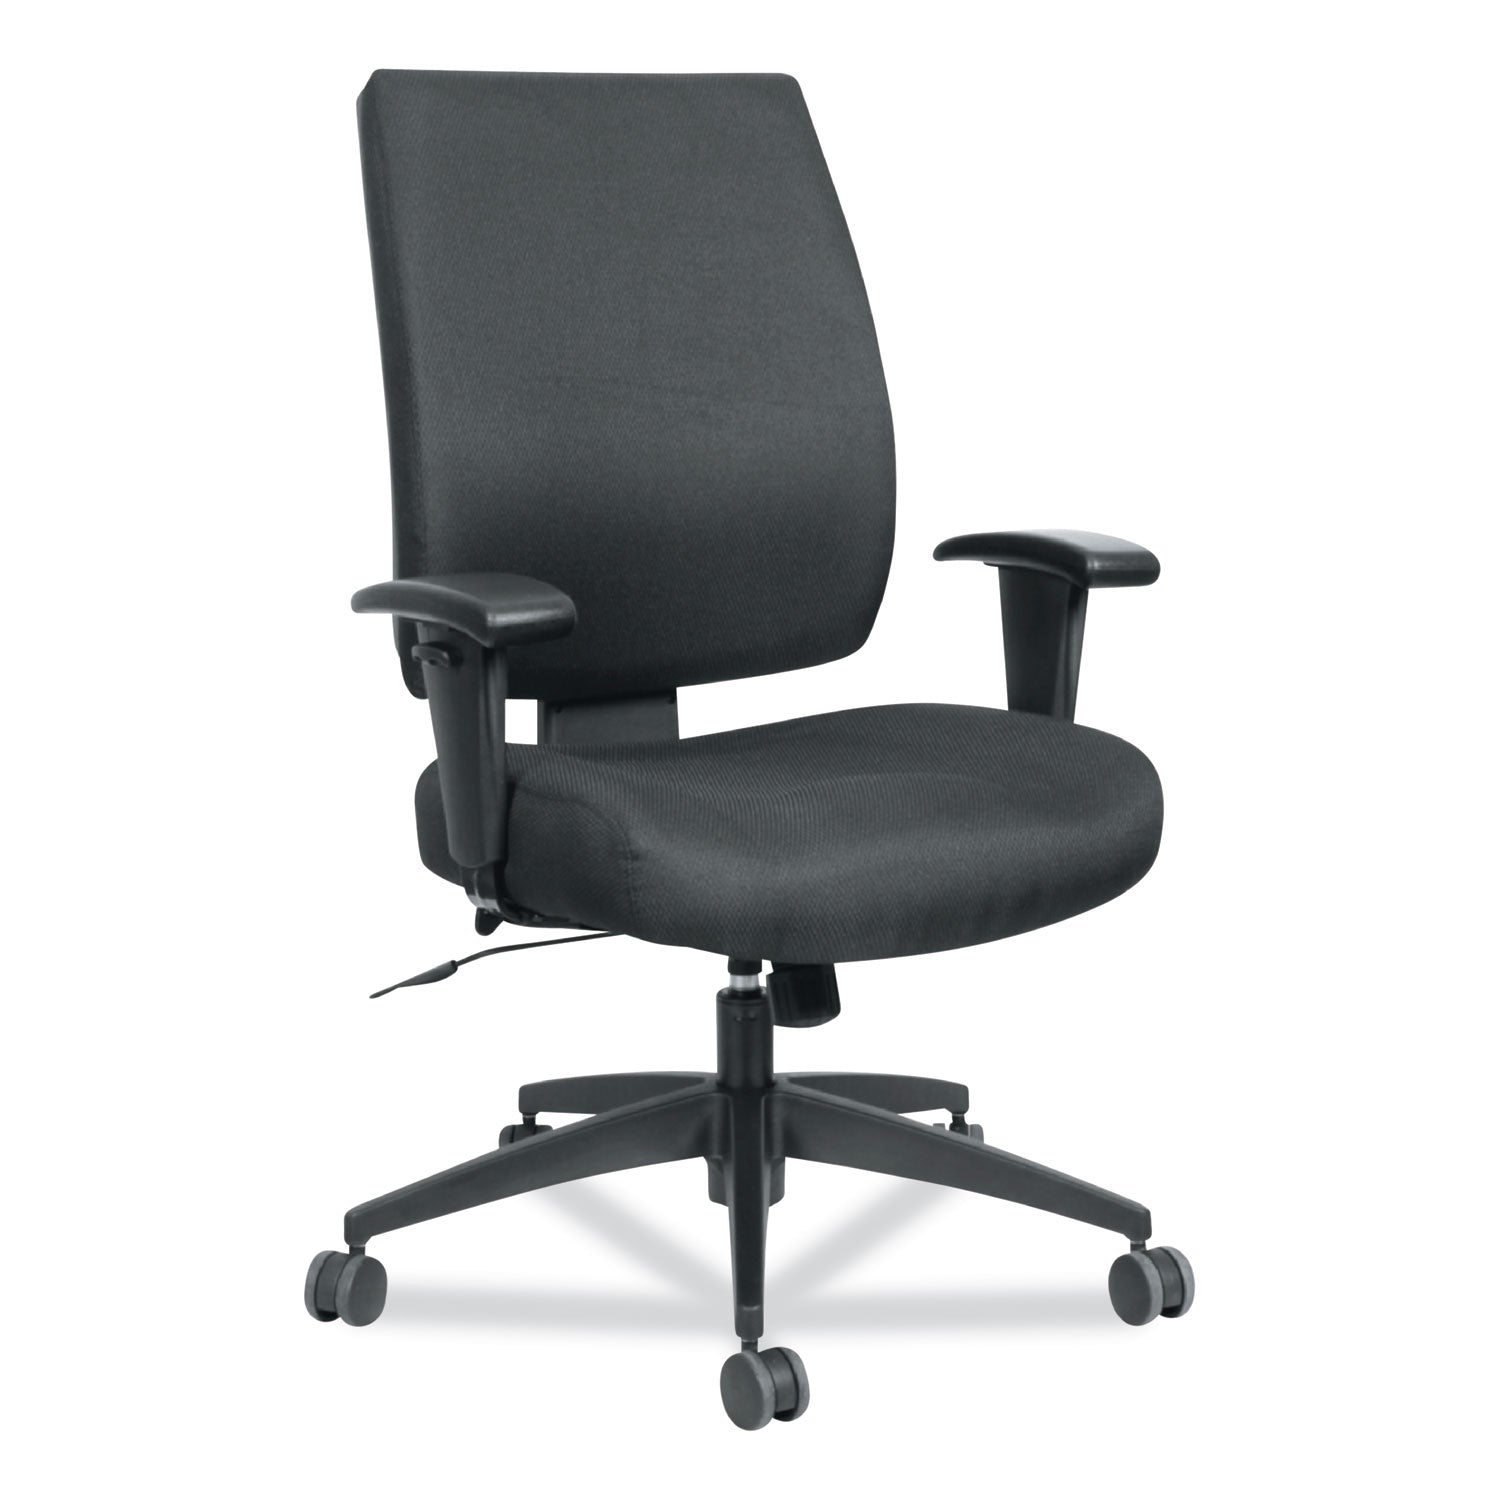 alera-wrigley-series-high-performance-mid-back-synchro-tilt-task-chair-supports-275-lb-1791-to-2188-seat-height-black_alehps4201 - 1